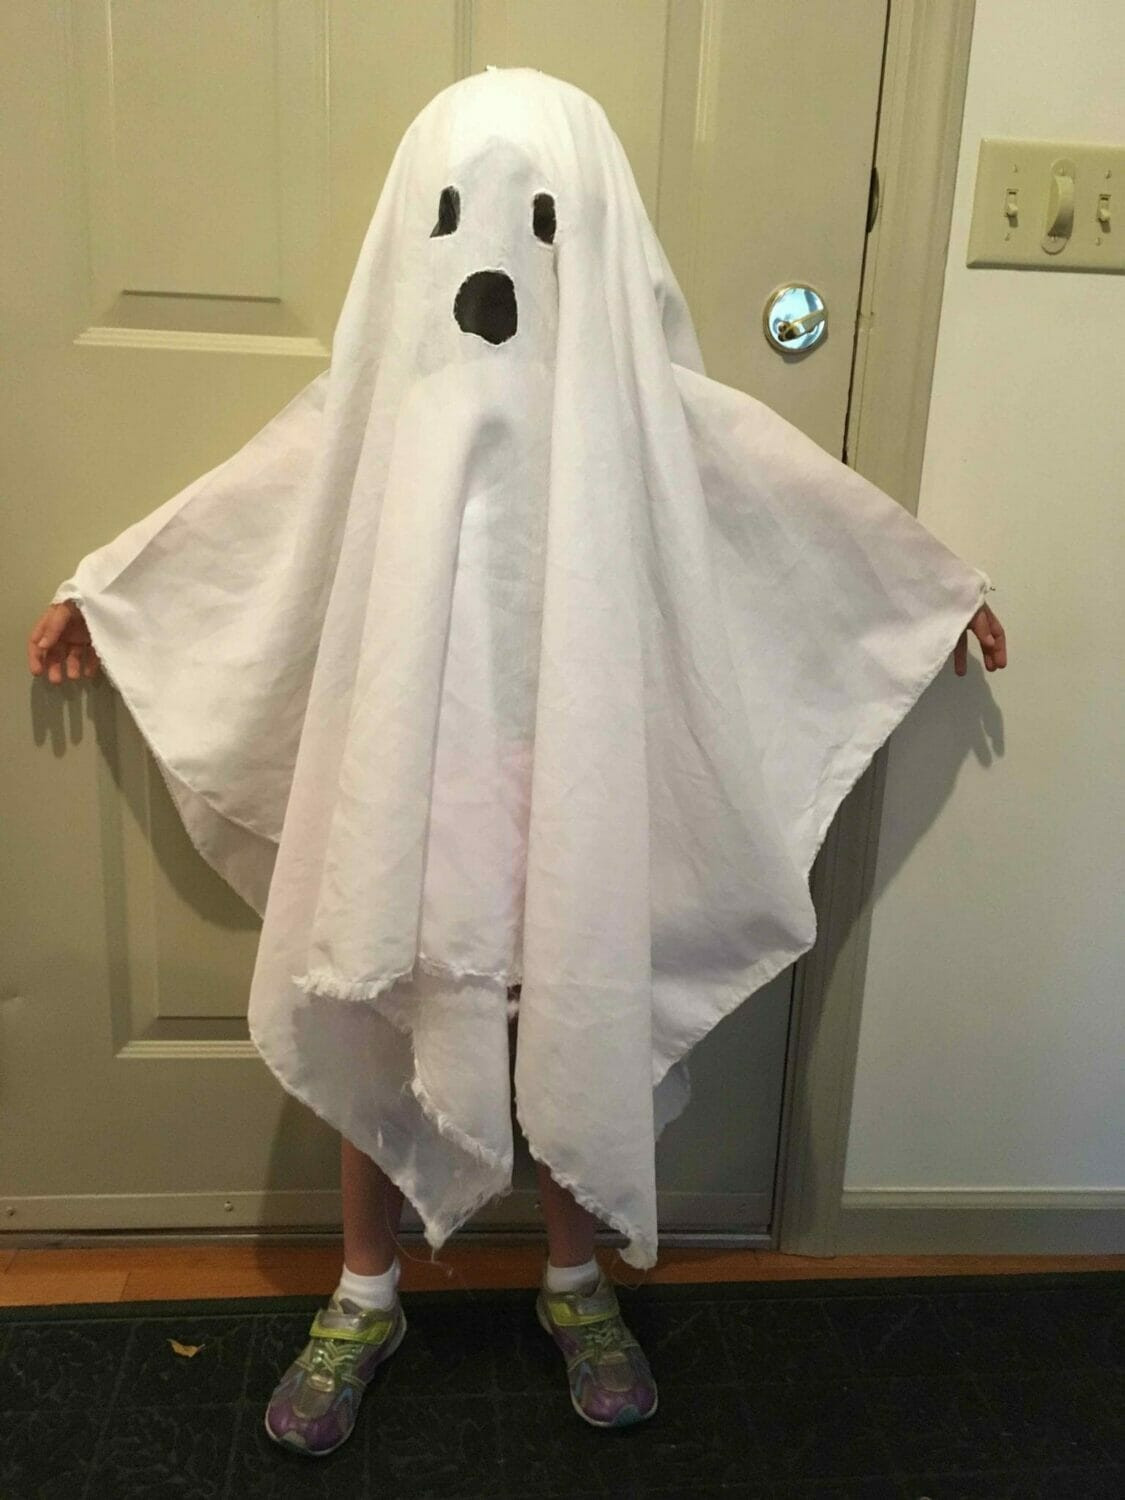 Diy Kids Ghost Costume
 How To Make A Ghost Costume It s Harder Than You d Think